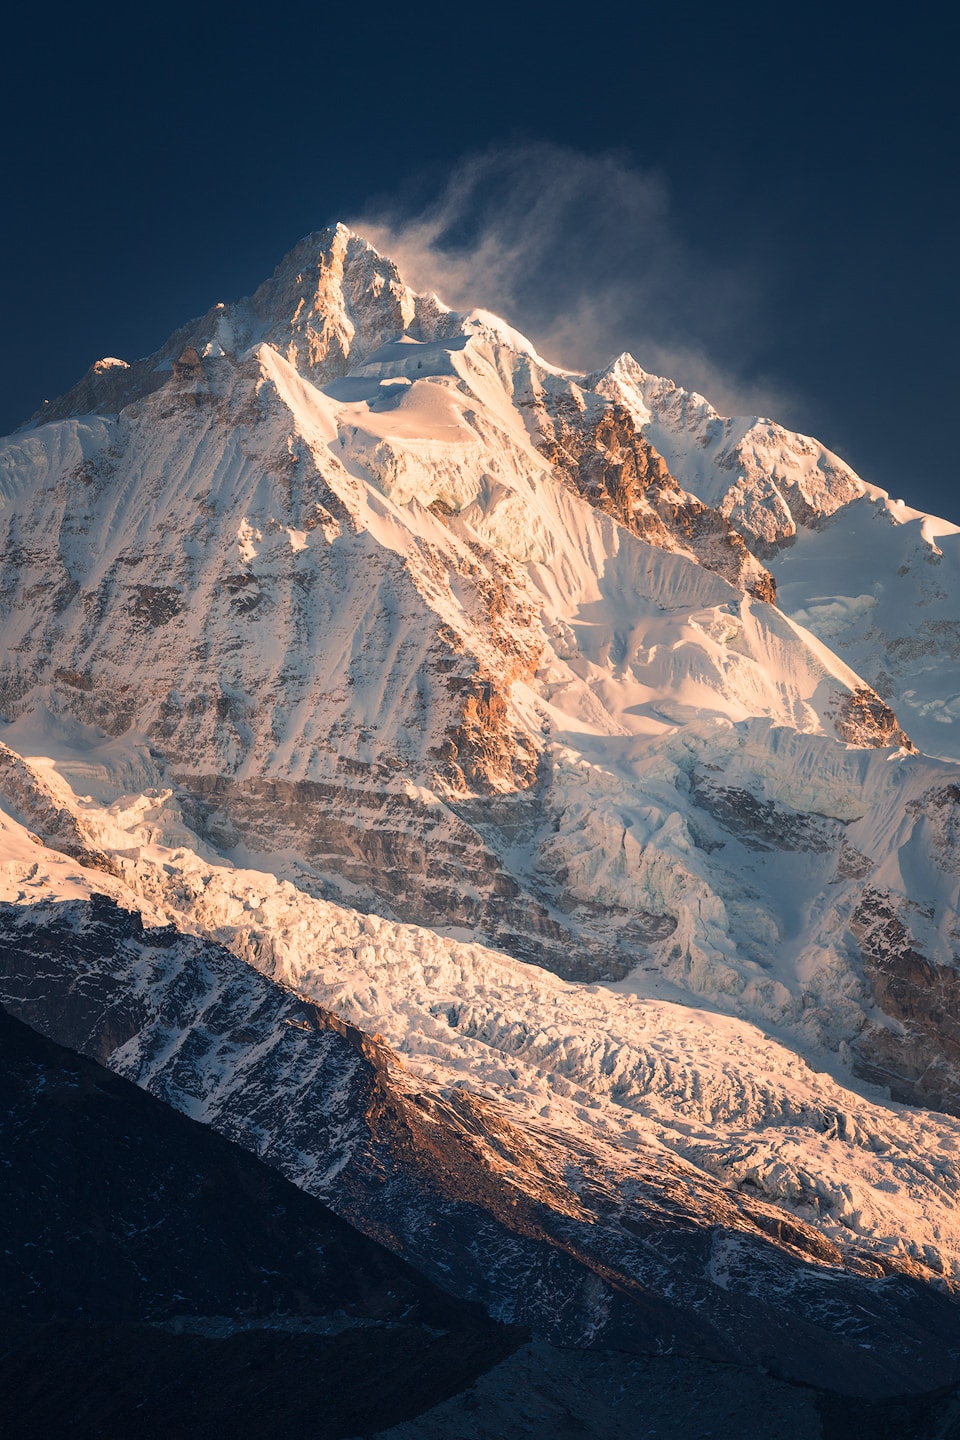 First light on the glaciers of Kangchenjunga - the words third highest peak.